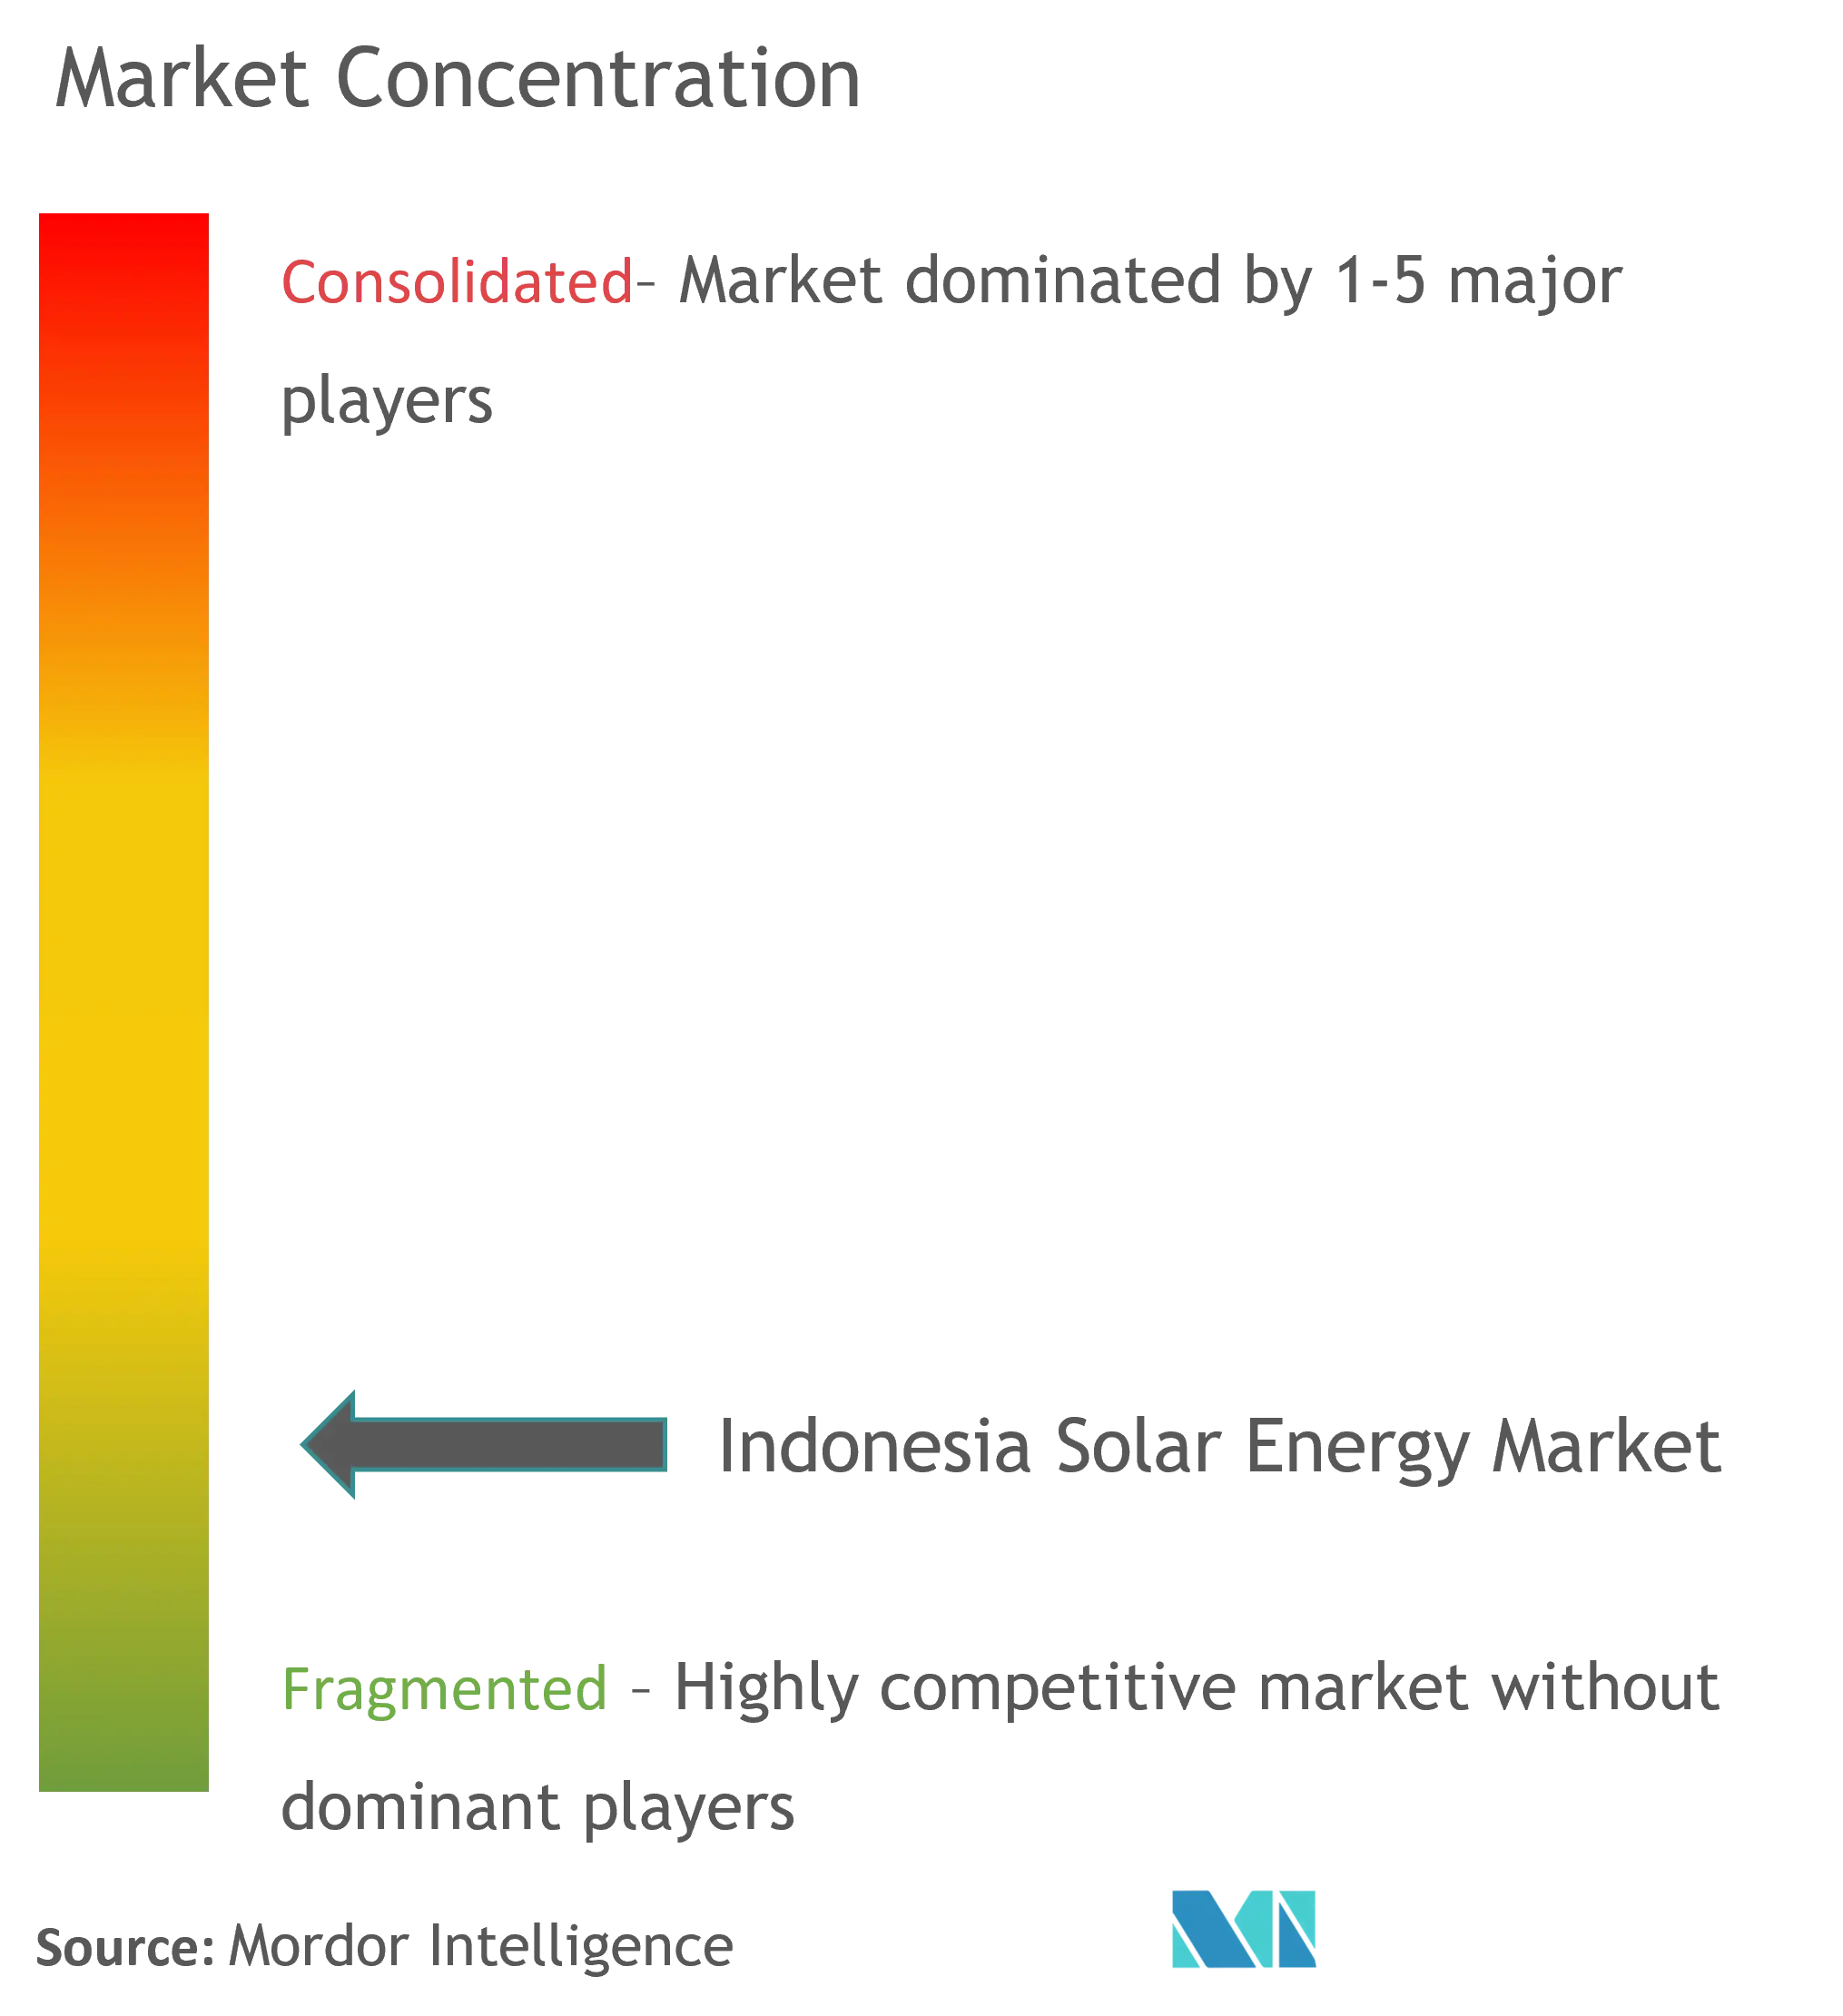 Indonesia Solar Energy Market Concentration